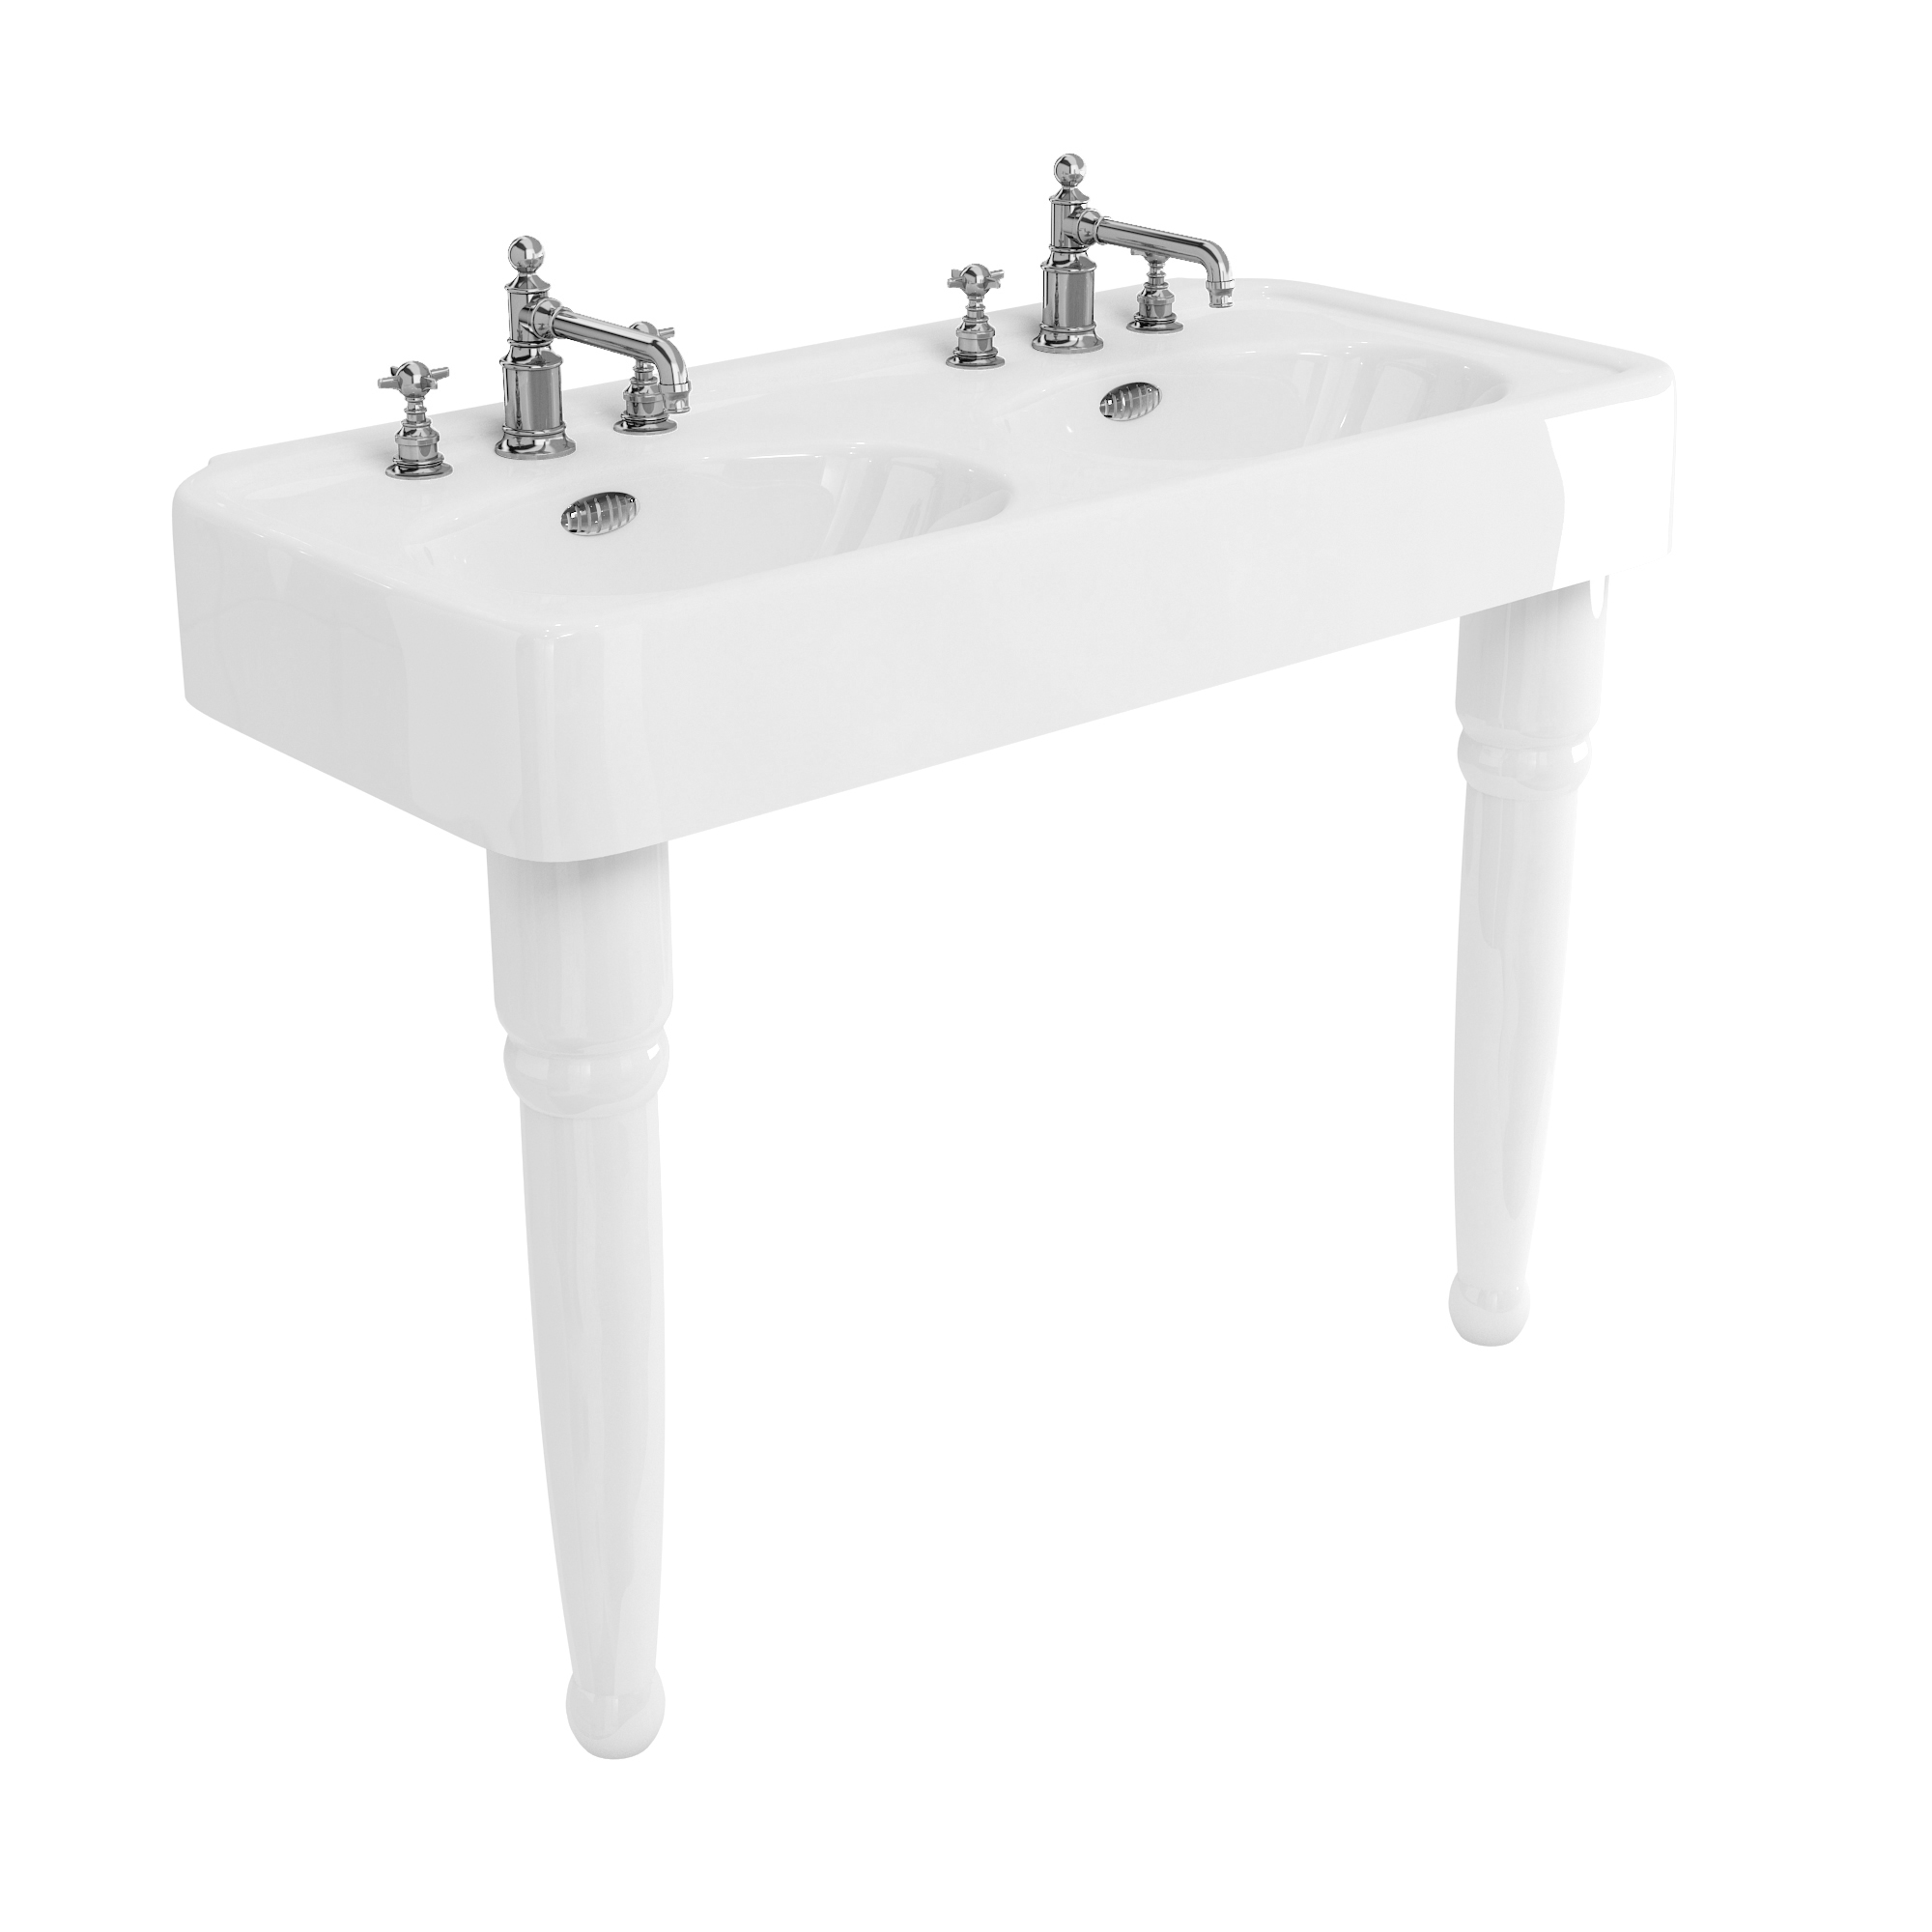 Arcade 1200mm basin with chrome overflow & ceramic console legs